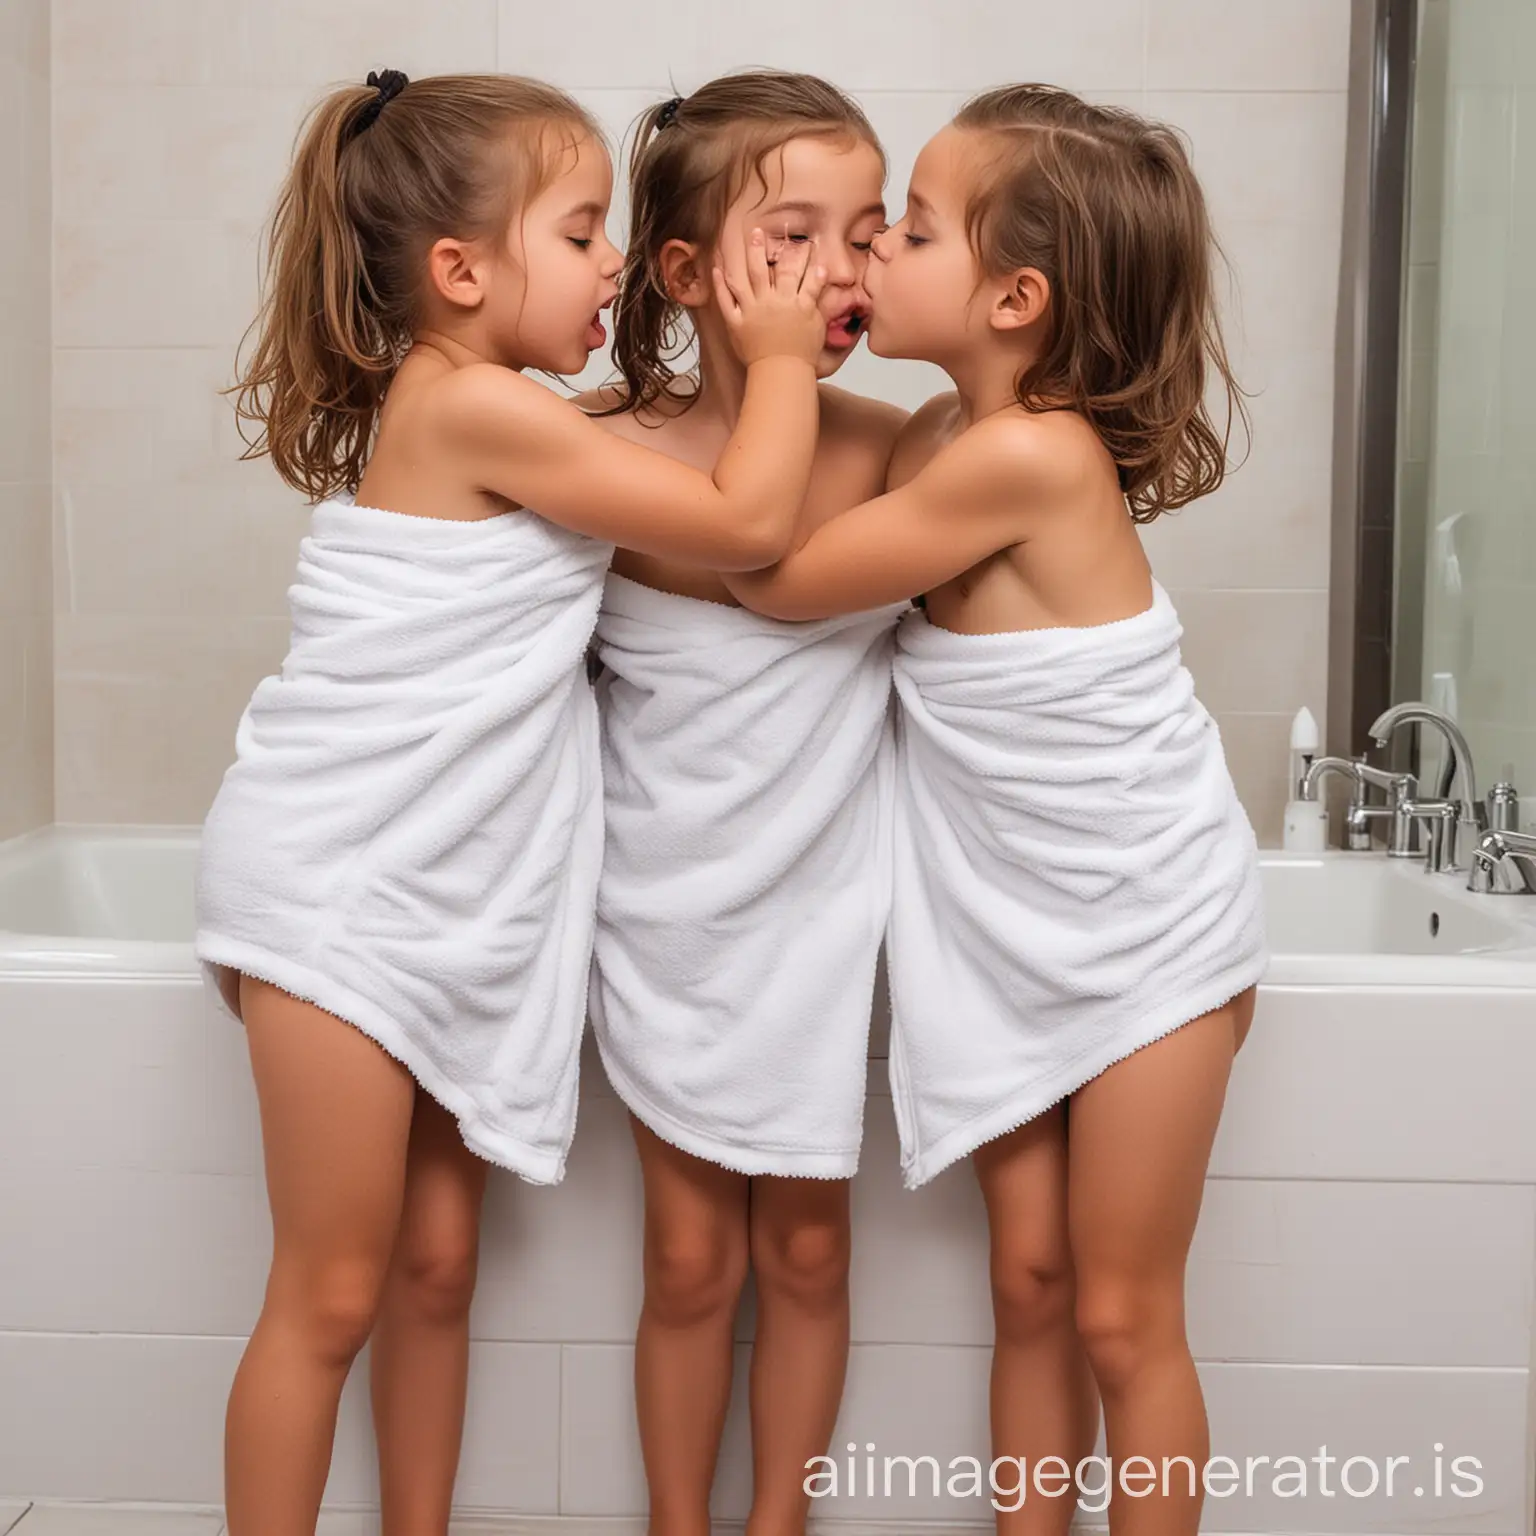 2 adorable girls kissing with towel around waist in the bathroom.